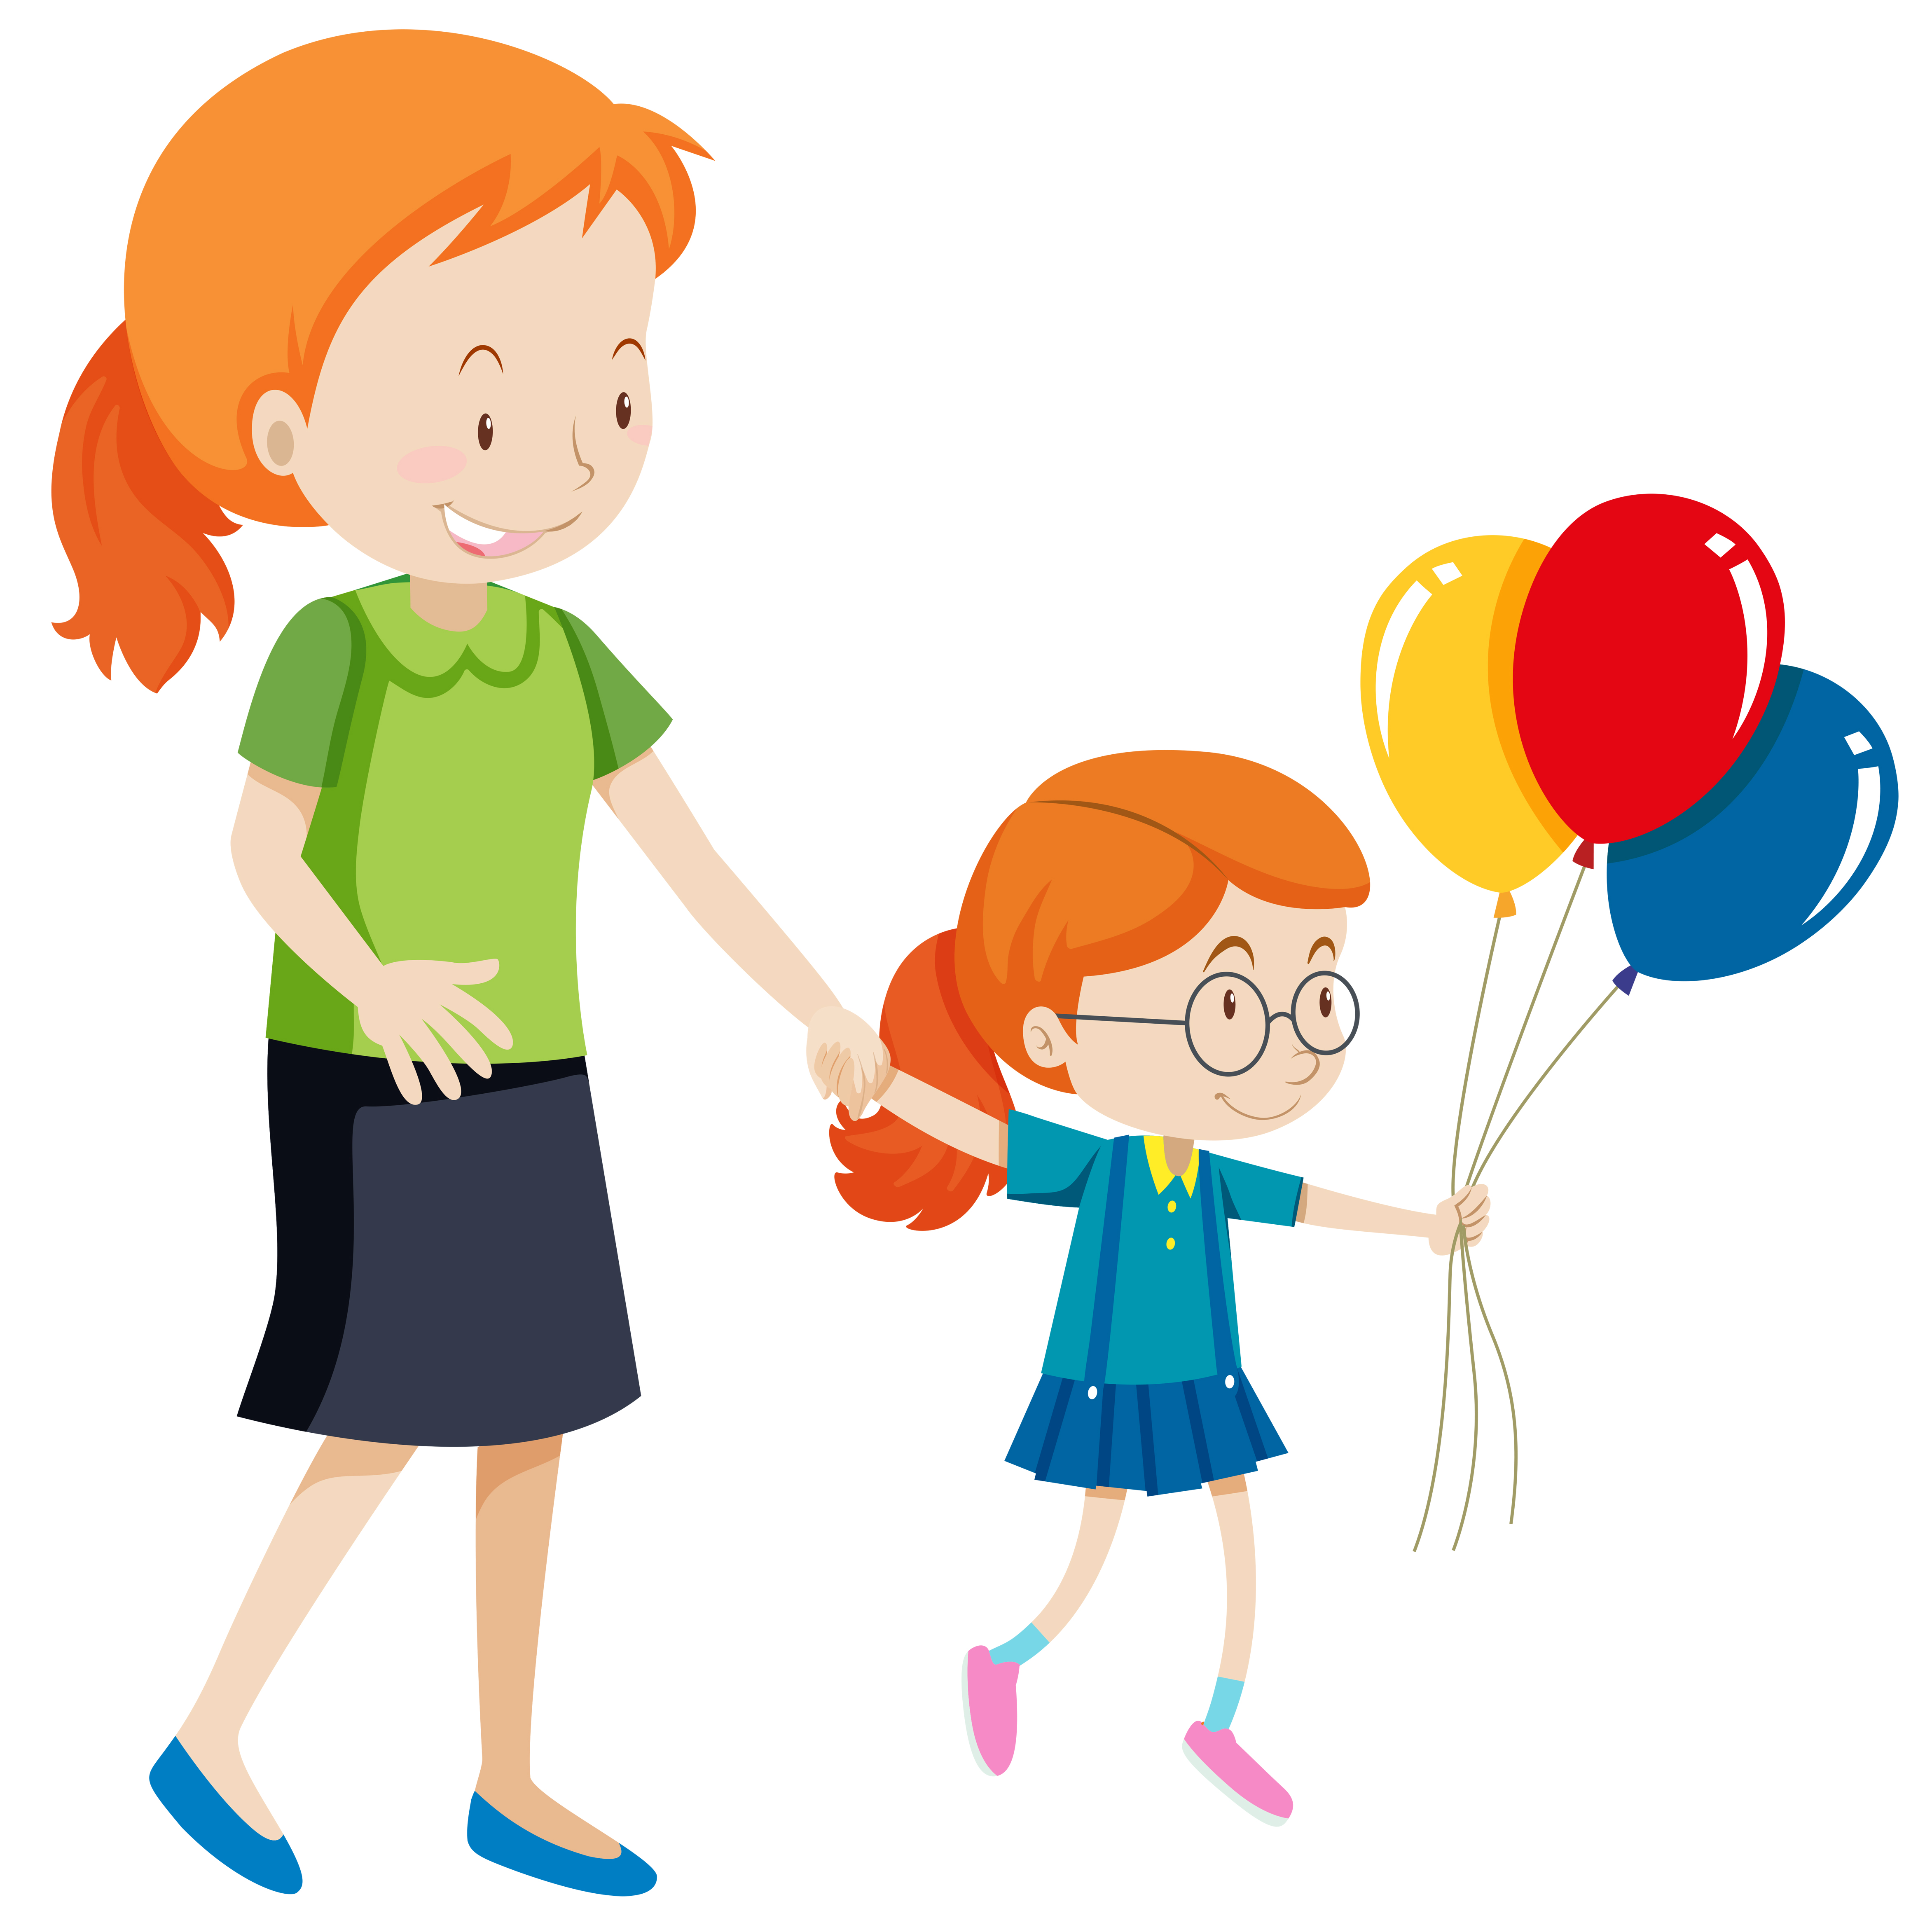 Download Mother and daughter holding balloons - Download Free Vectors, Clipart Graphics & Vector Art